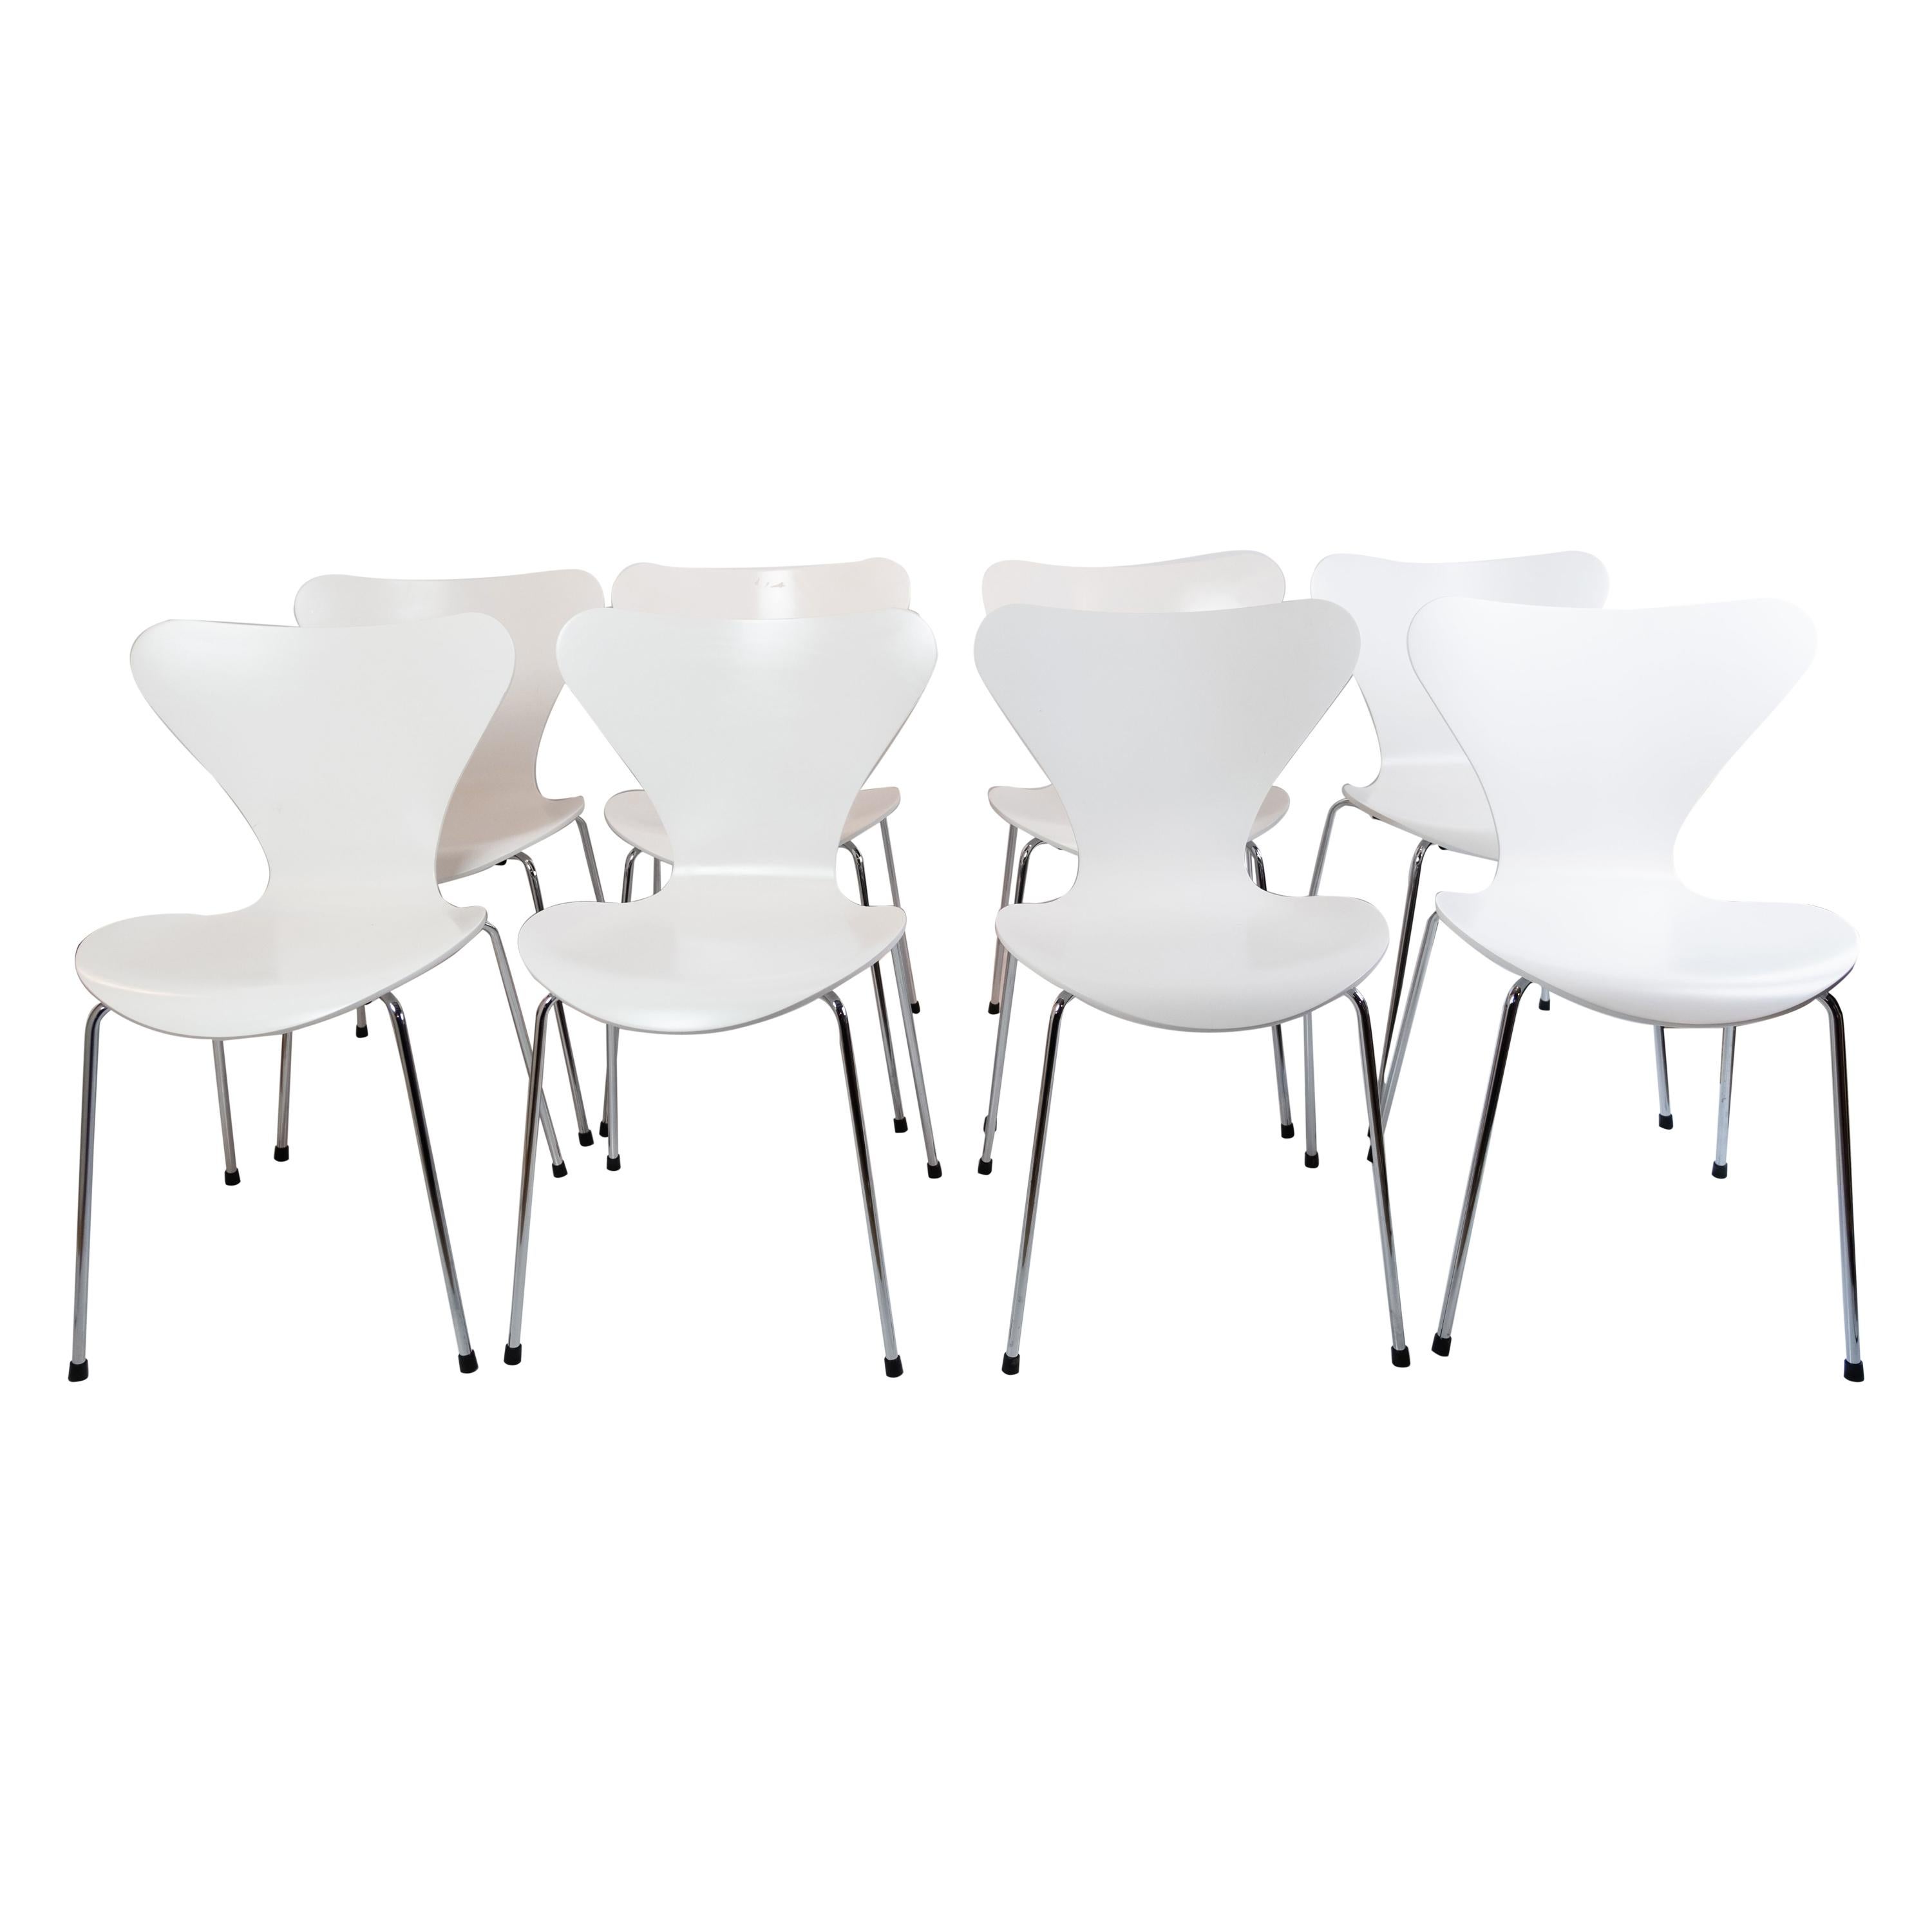 Set of 8 Seven Chairs, Model 3107, Designed by Arne Jacobsen